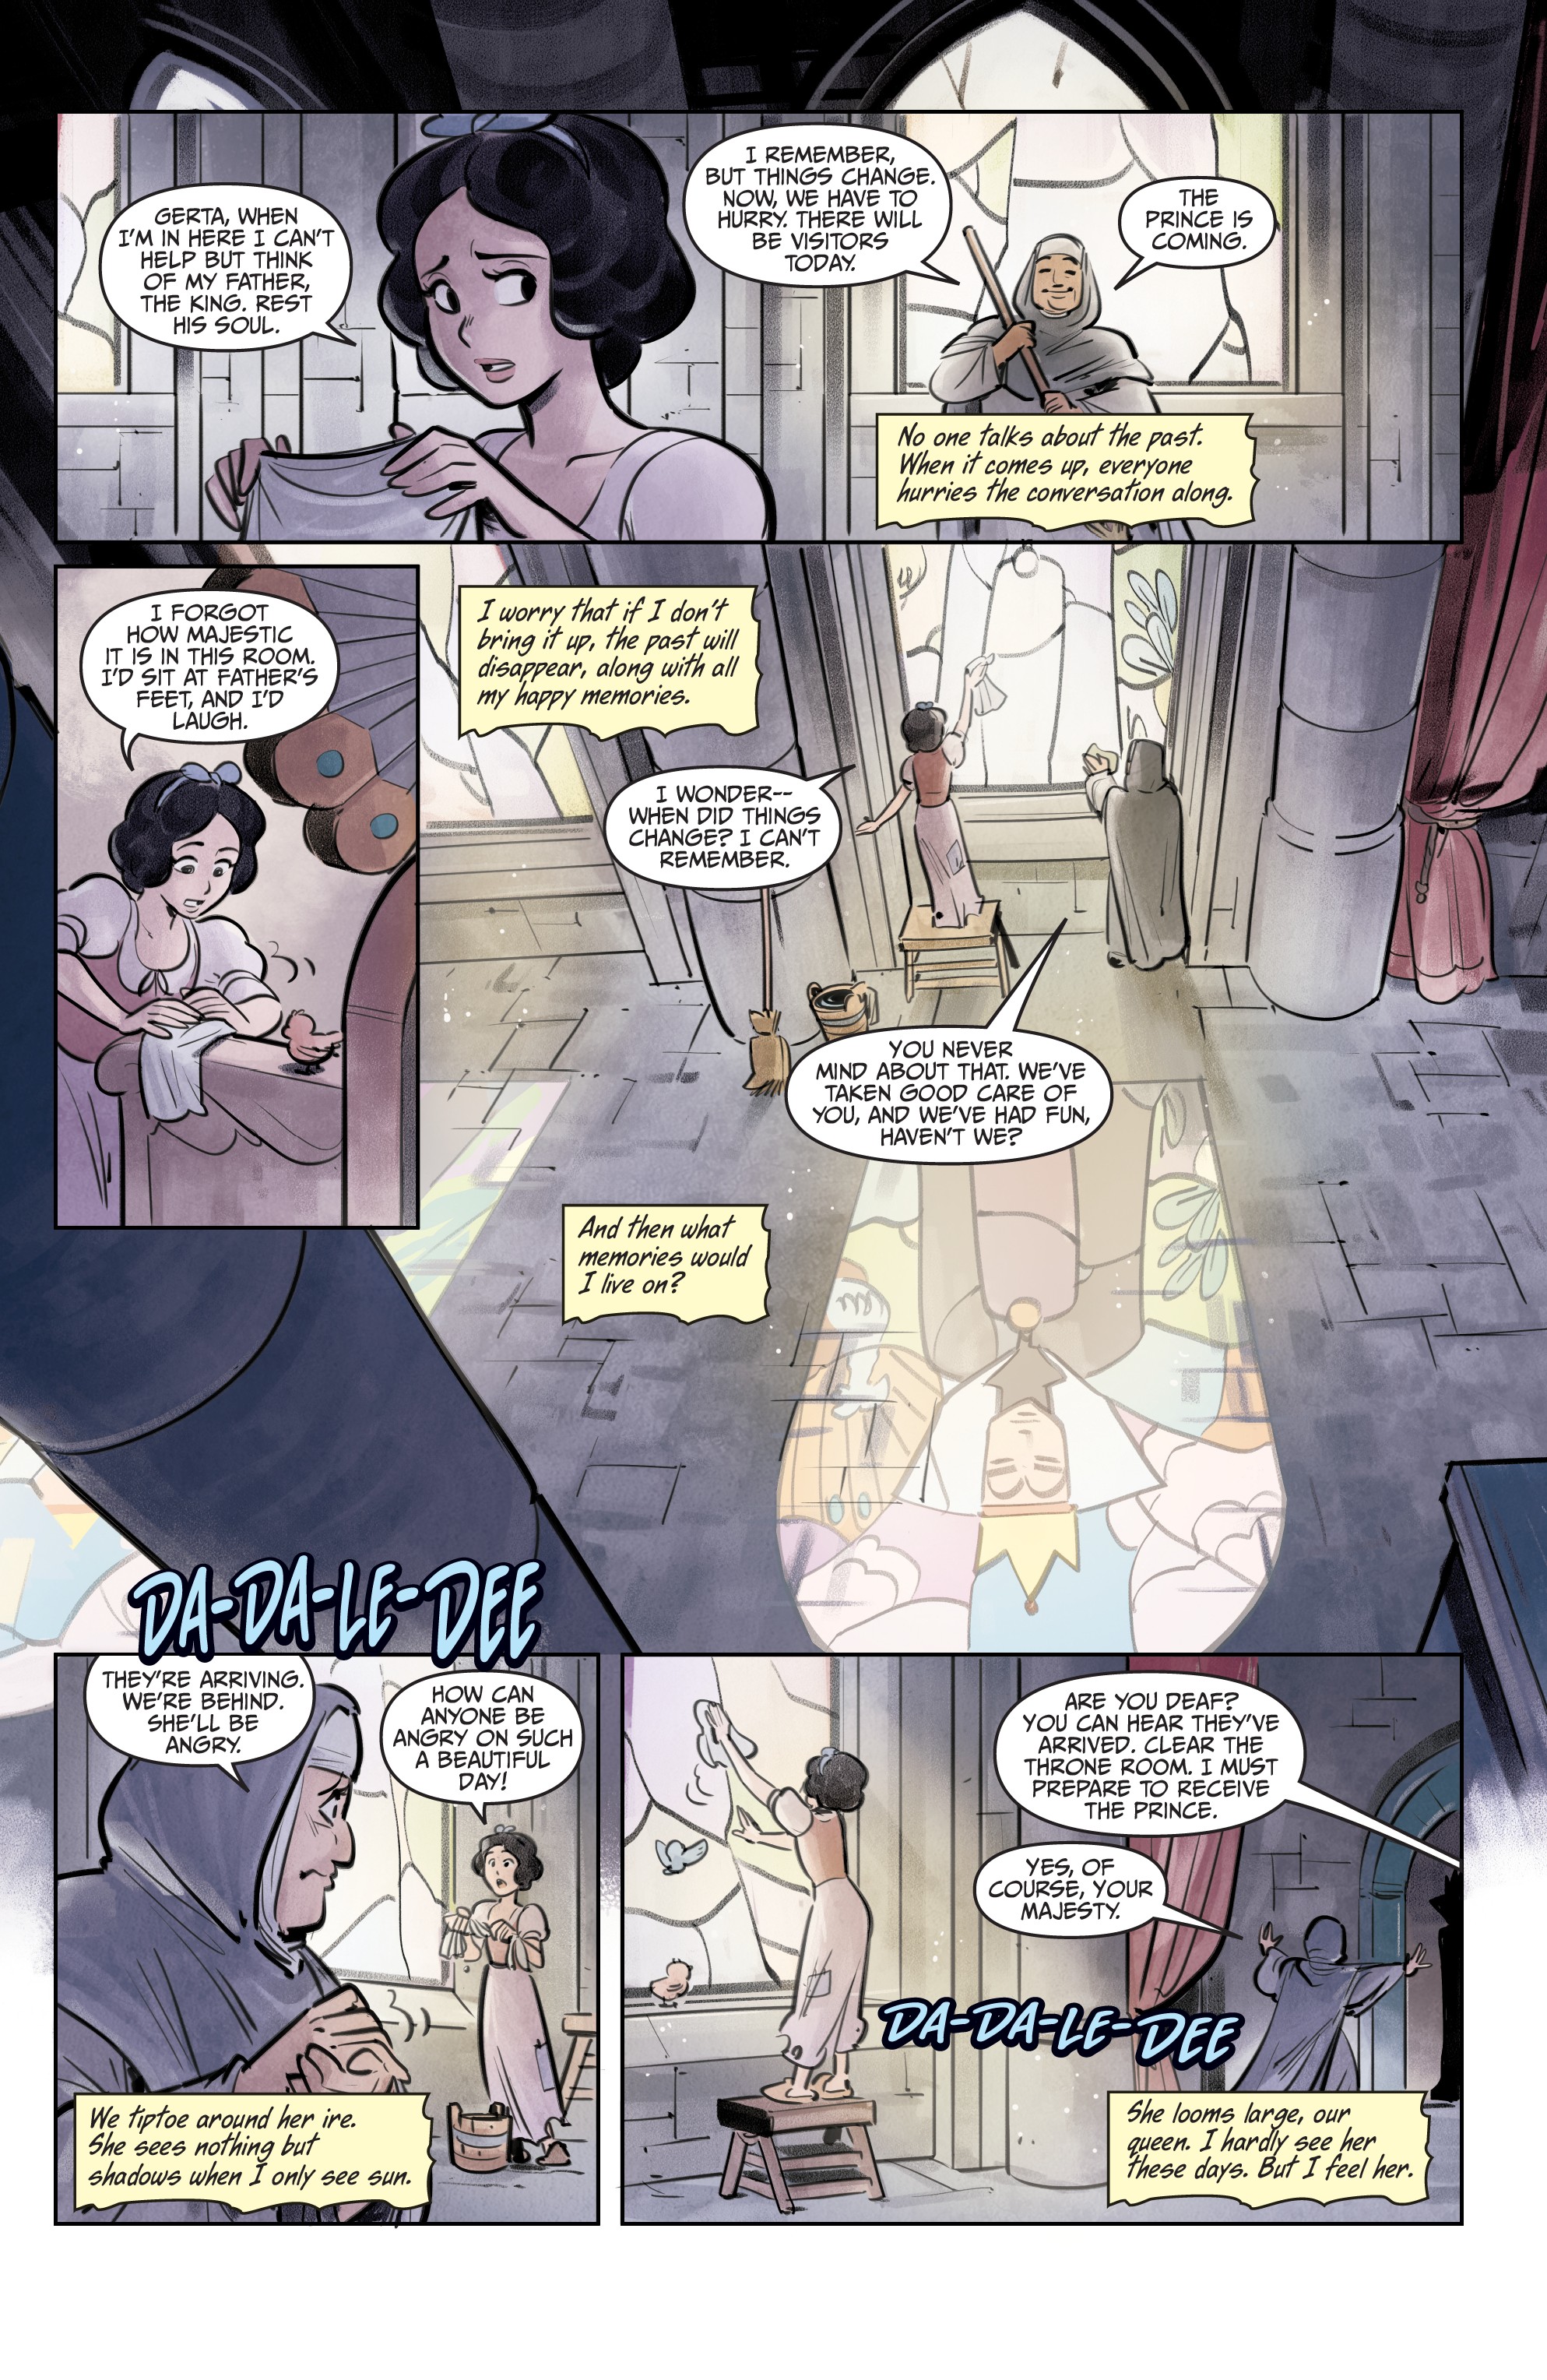 Snow White and the Seven Dwarfs (2019-): Chapter 1 - Page 4